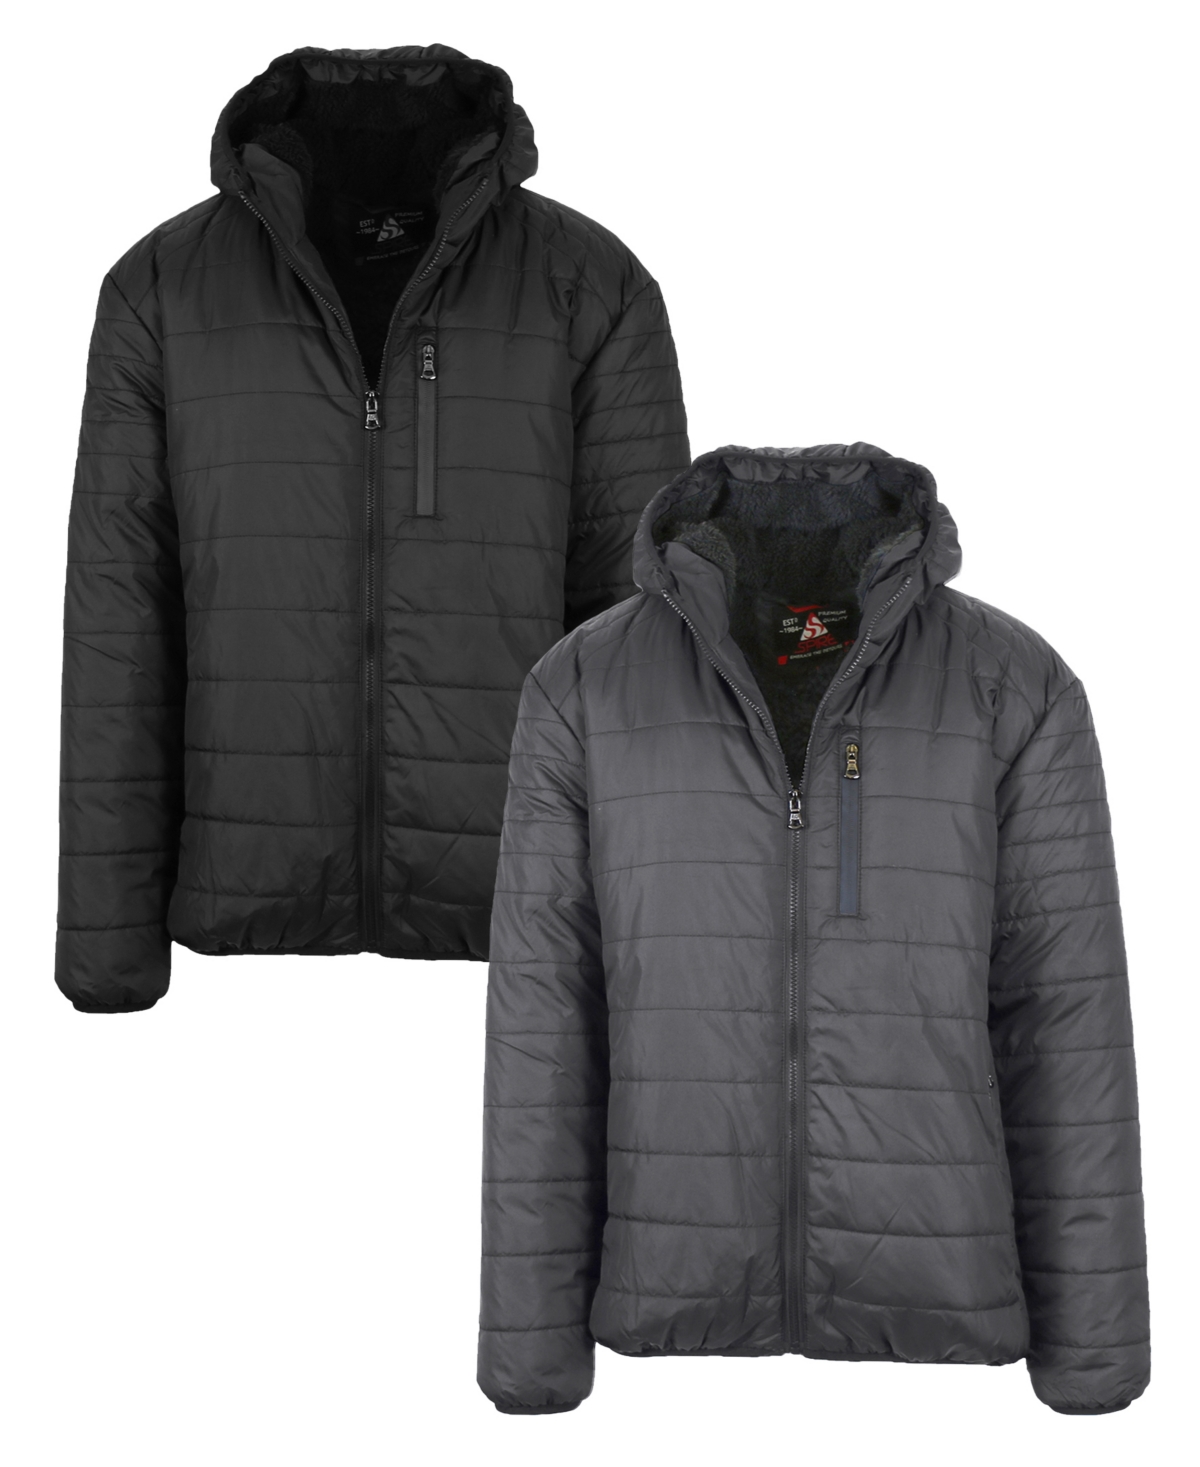 Men's Sherpa Lined Hooded Puffer Jacket, Pack of 2 - Olive-Charcoal